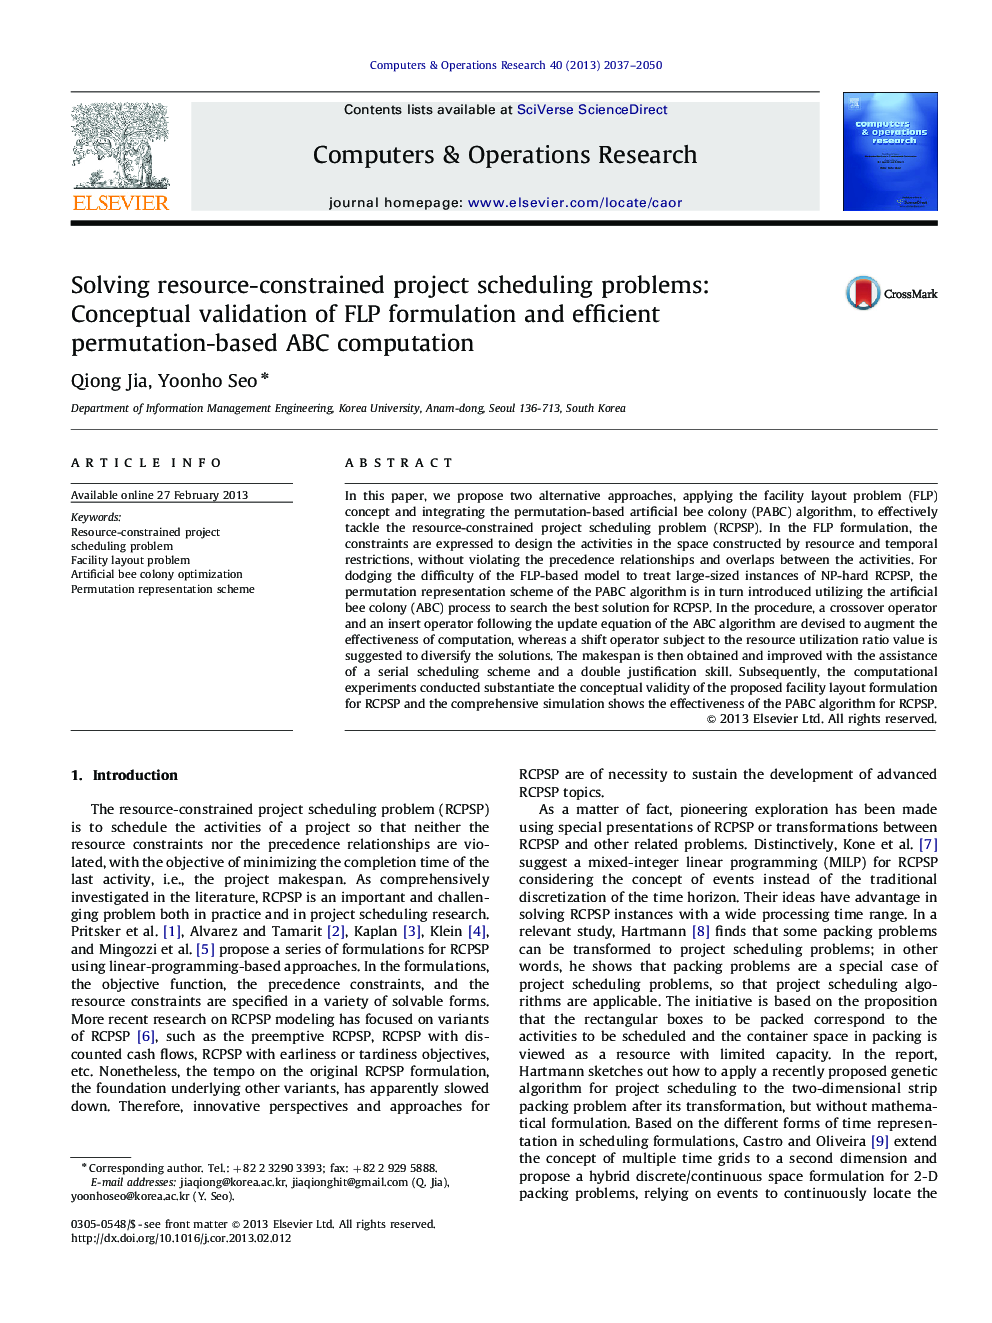 Solving resource-constrained project scheduling problems: Conceptual validation of FLP formulation and efficient permutation-based ABC computation